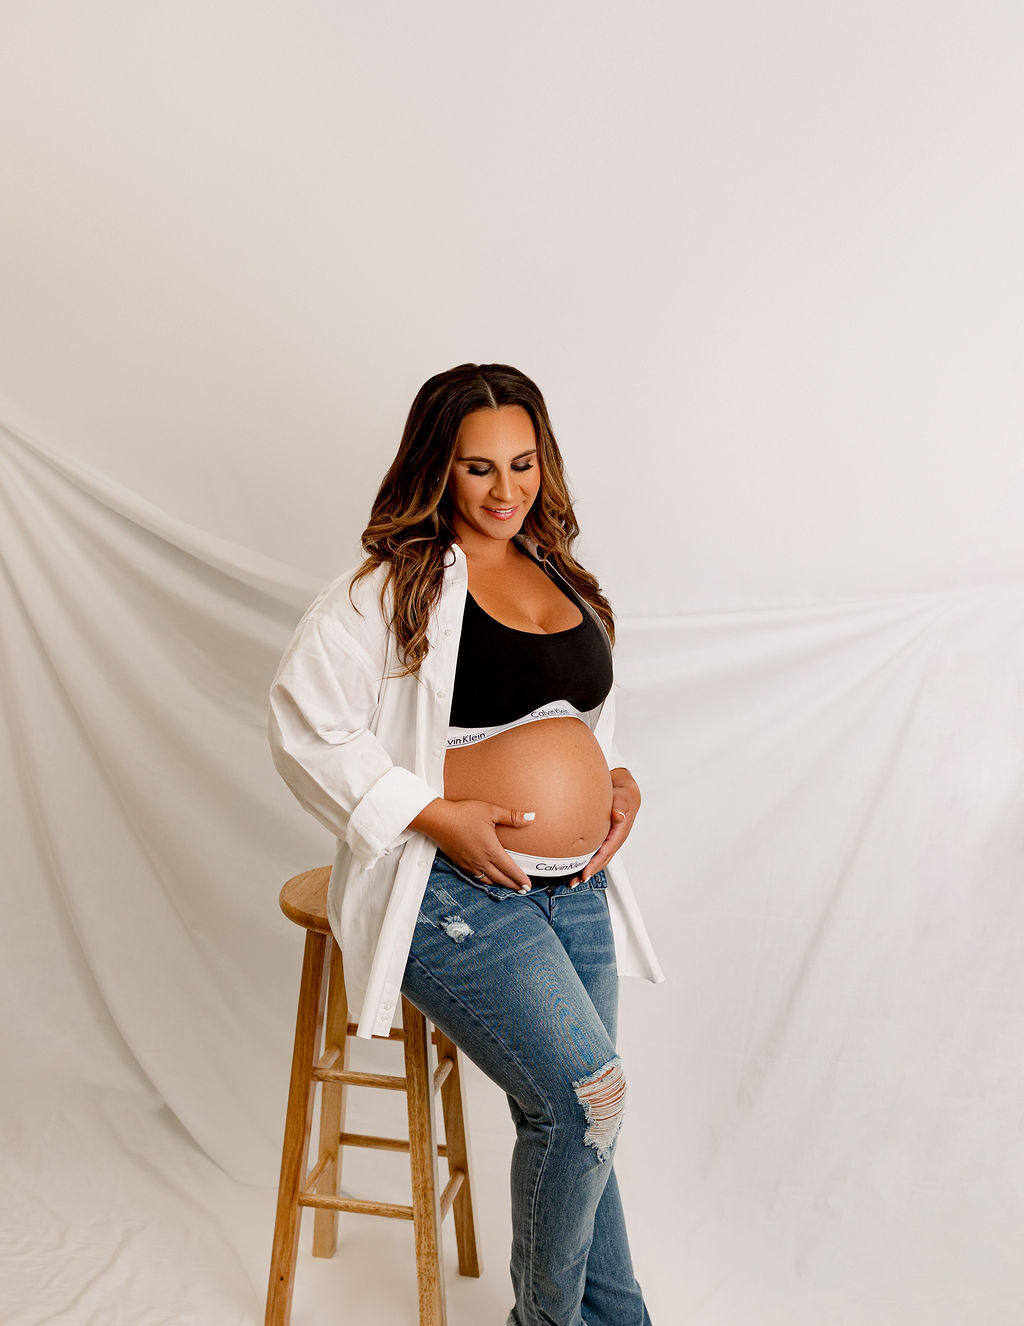 A happy mom to be stands in a studio leaning against a tall wooden stool holding and smiling down to her bump